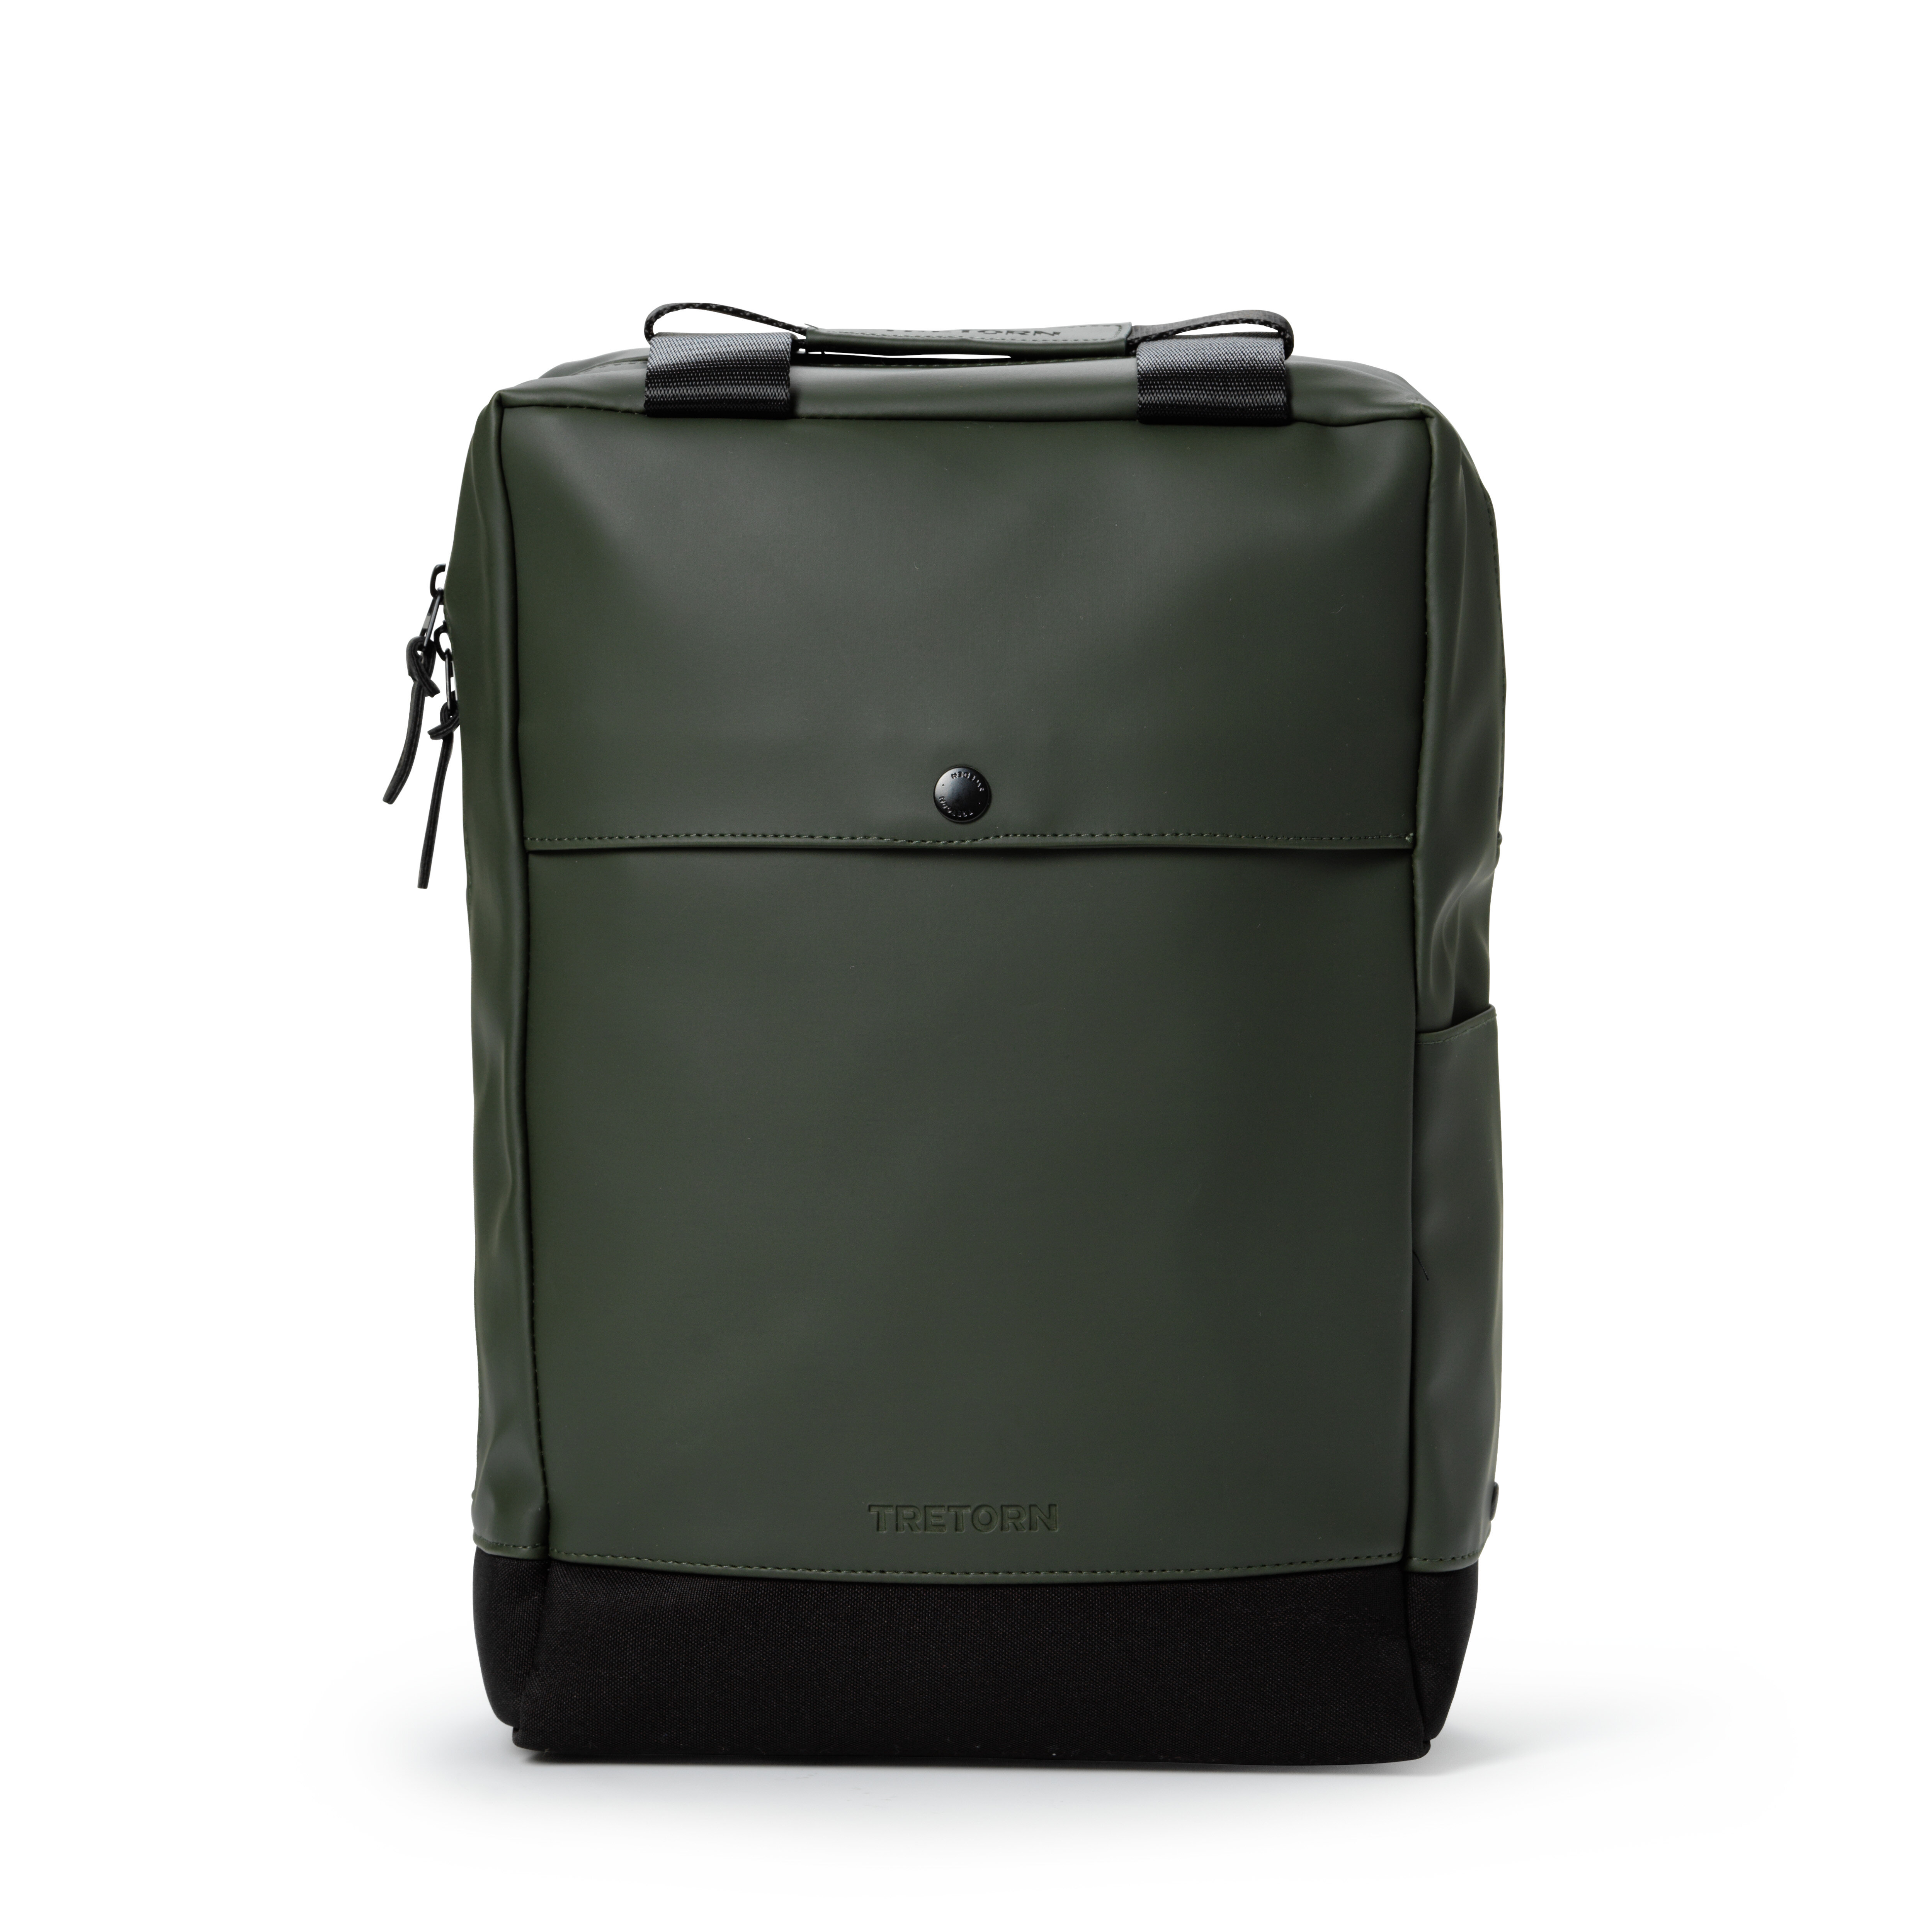 Wings Flexpack waterproof backpack from Tretorn in the colour green